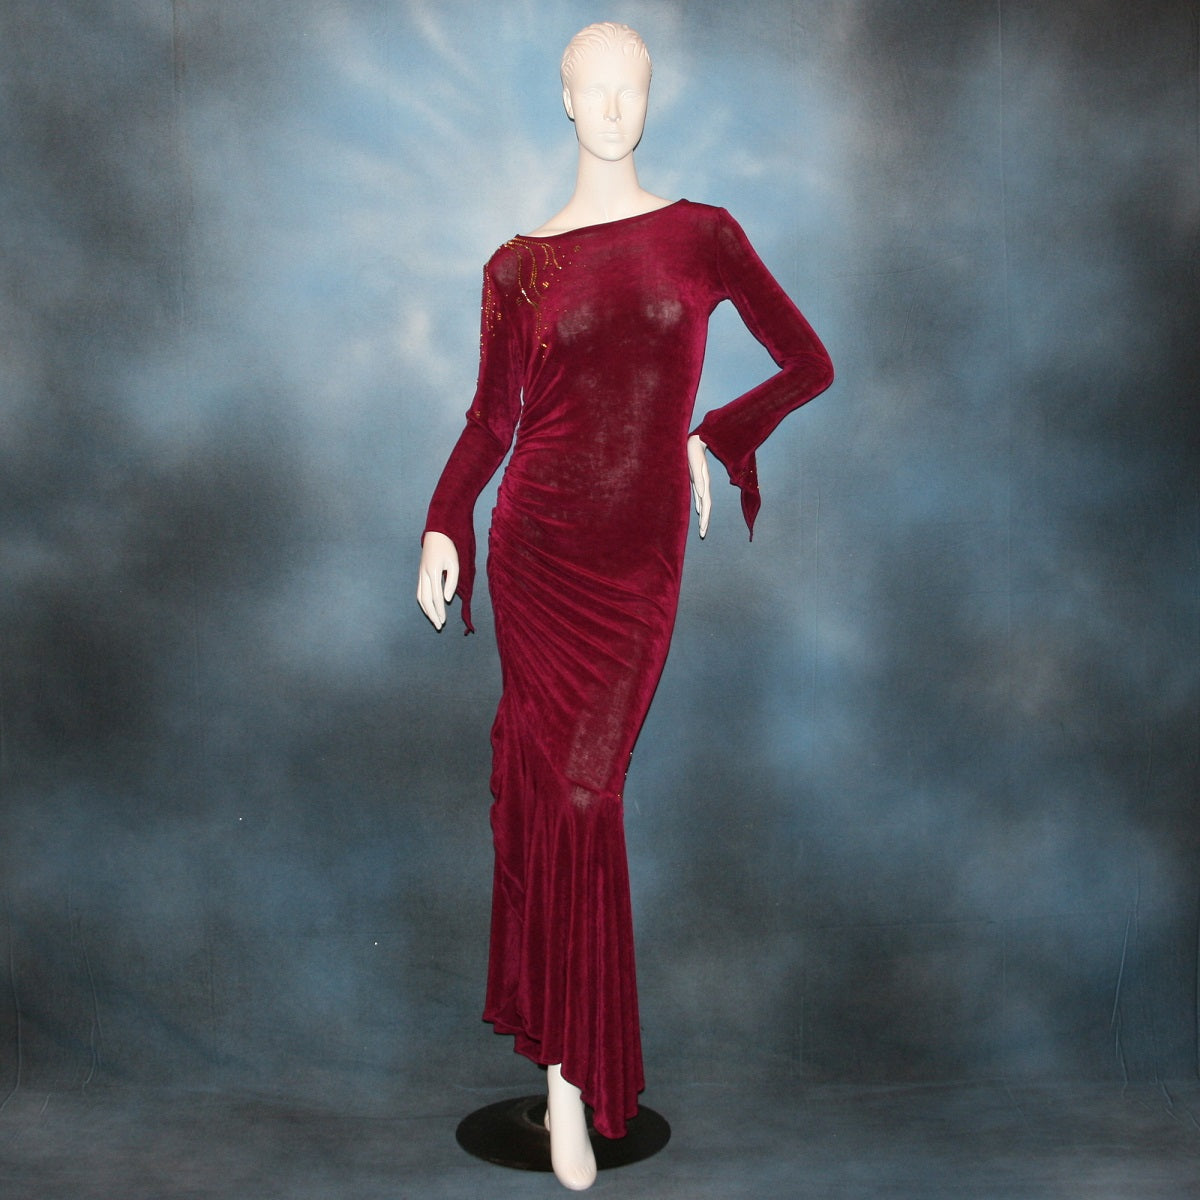 Crystal's Creations Magenta Latin/rhythm/tango dress created out of deep magenta/wine slinky features ruching, long flared sleeves & is embellished with gold aurum Swarovski rhinestone work 